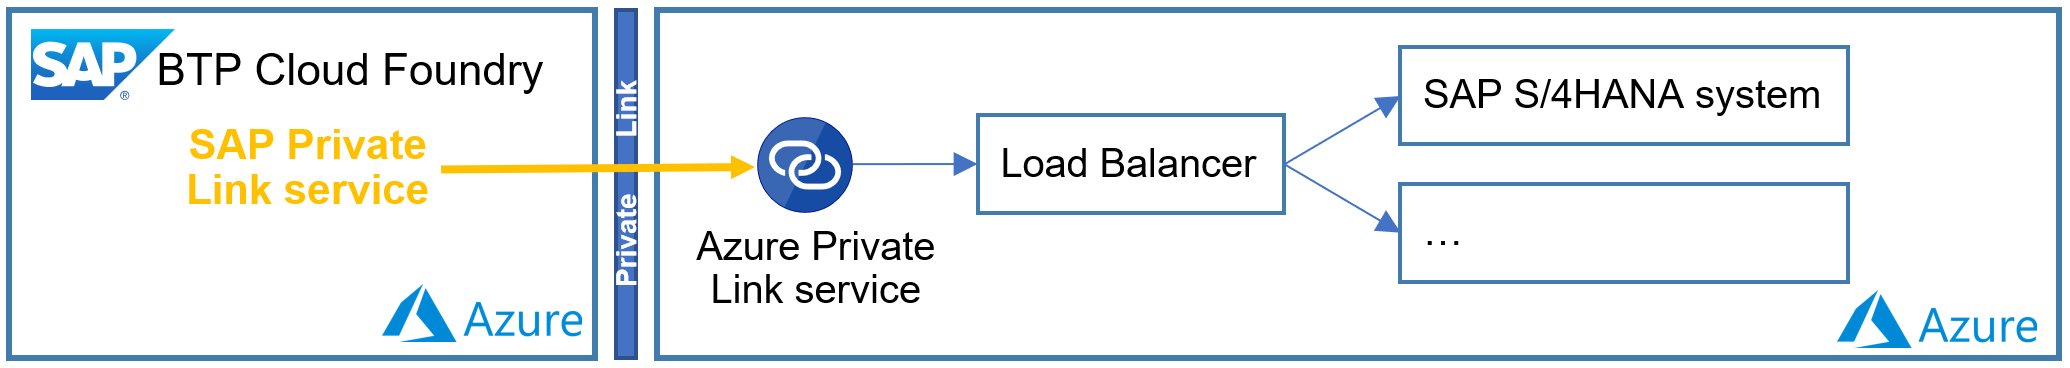 sap_private_link_connection_to_lb.png